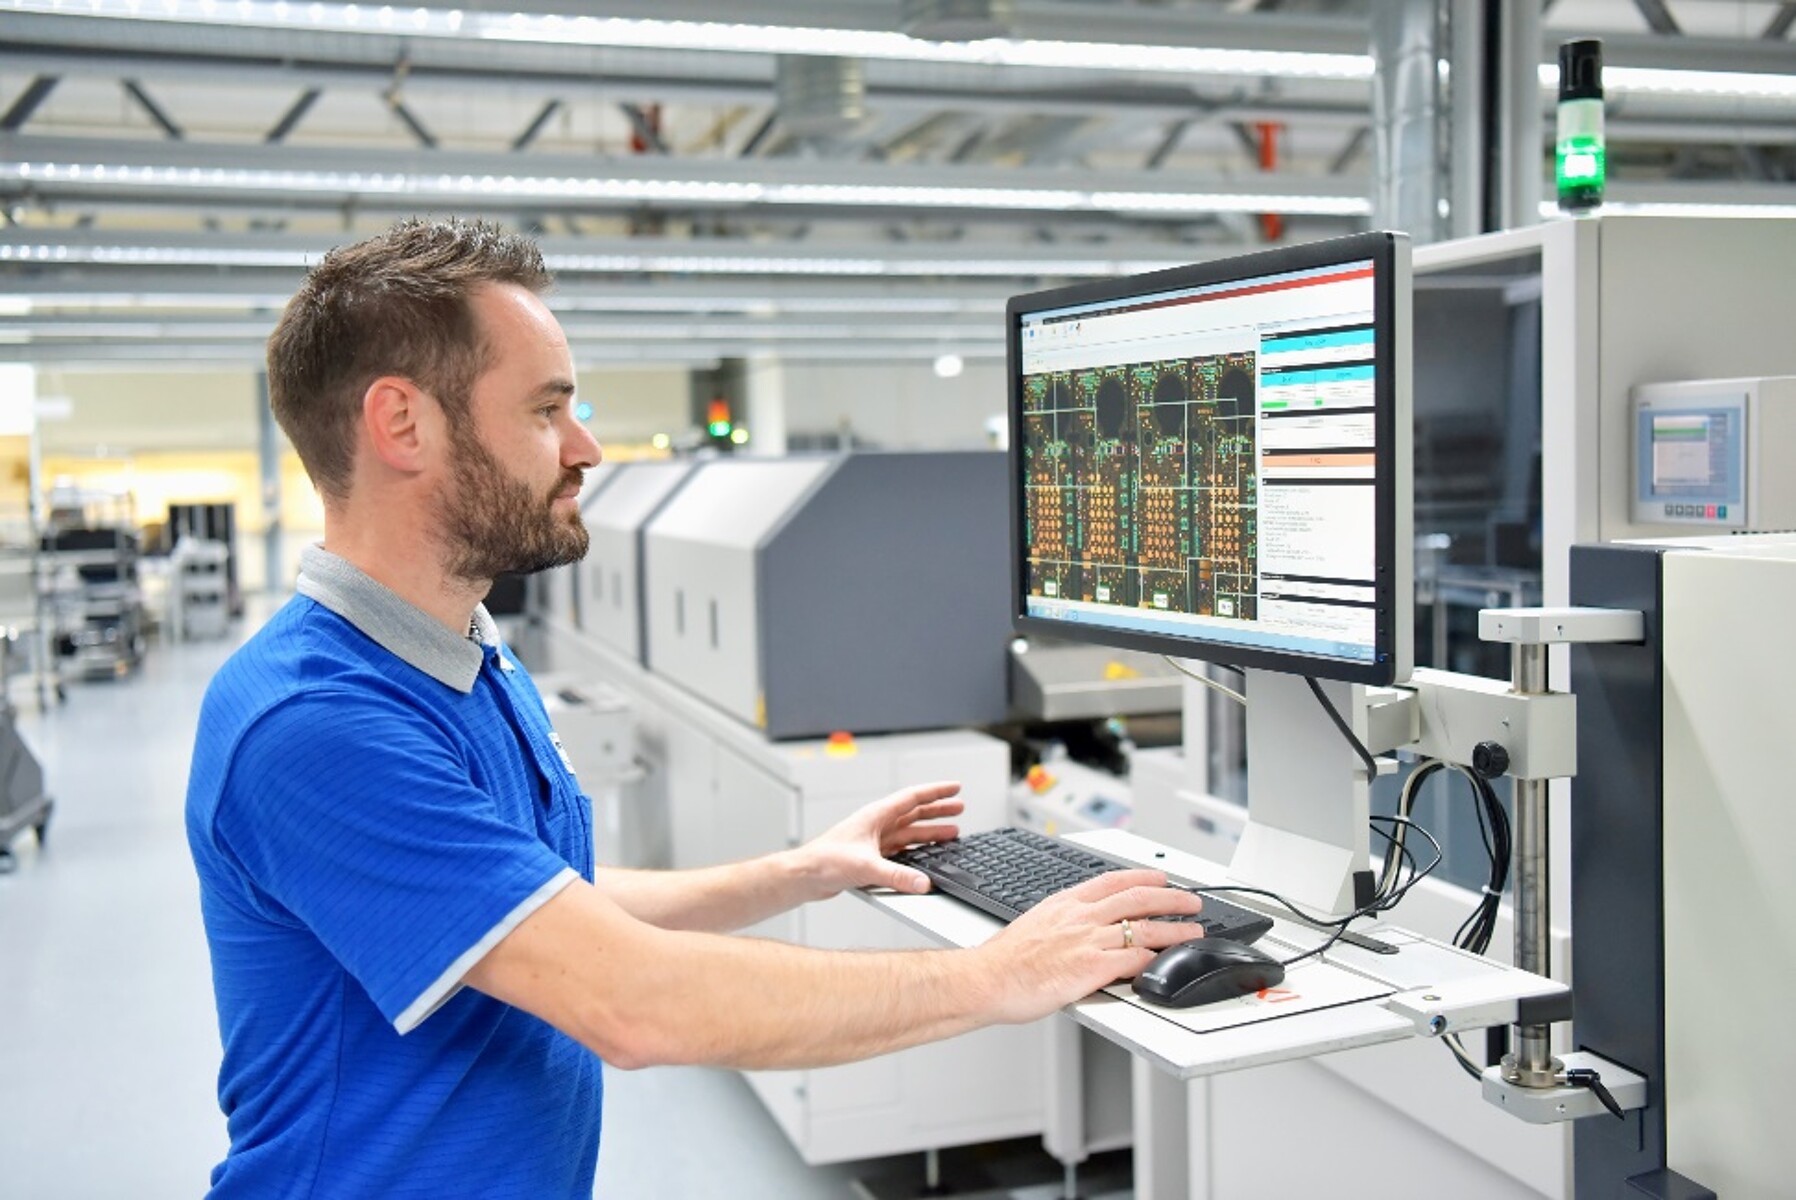 Example for Industrial Internet of Things: Monitoring a production plant